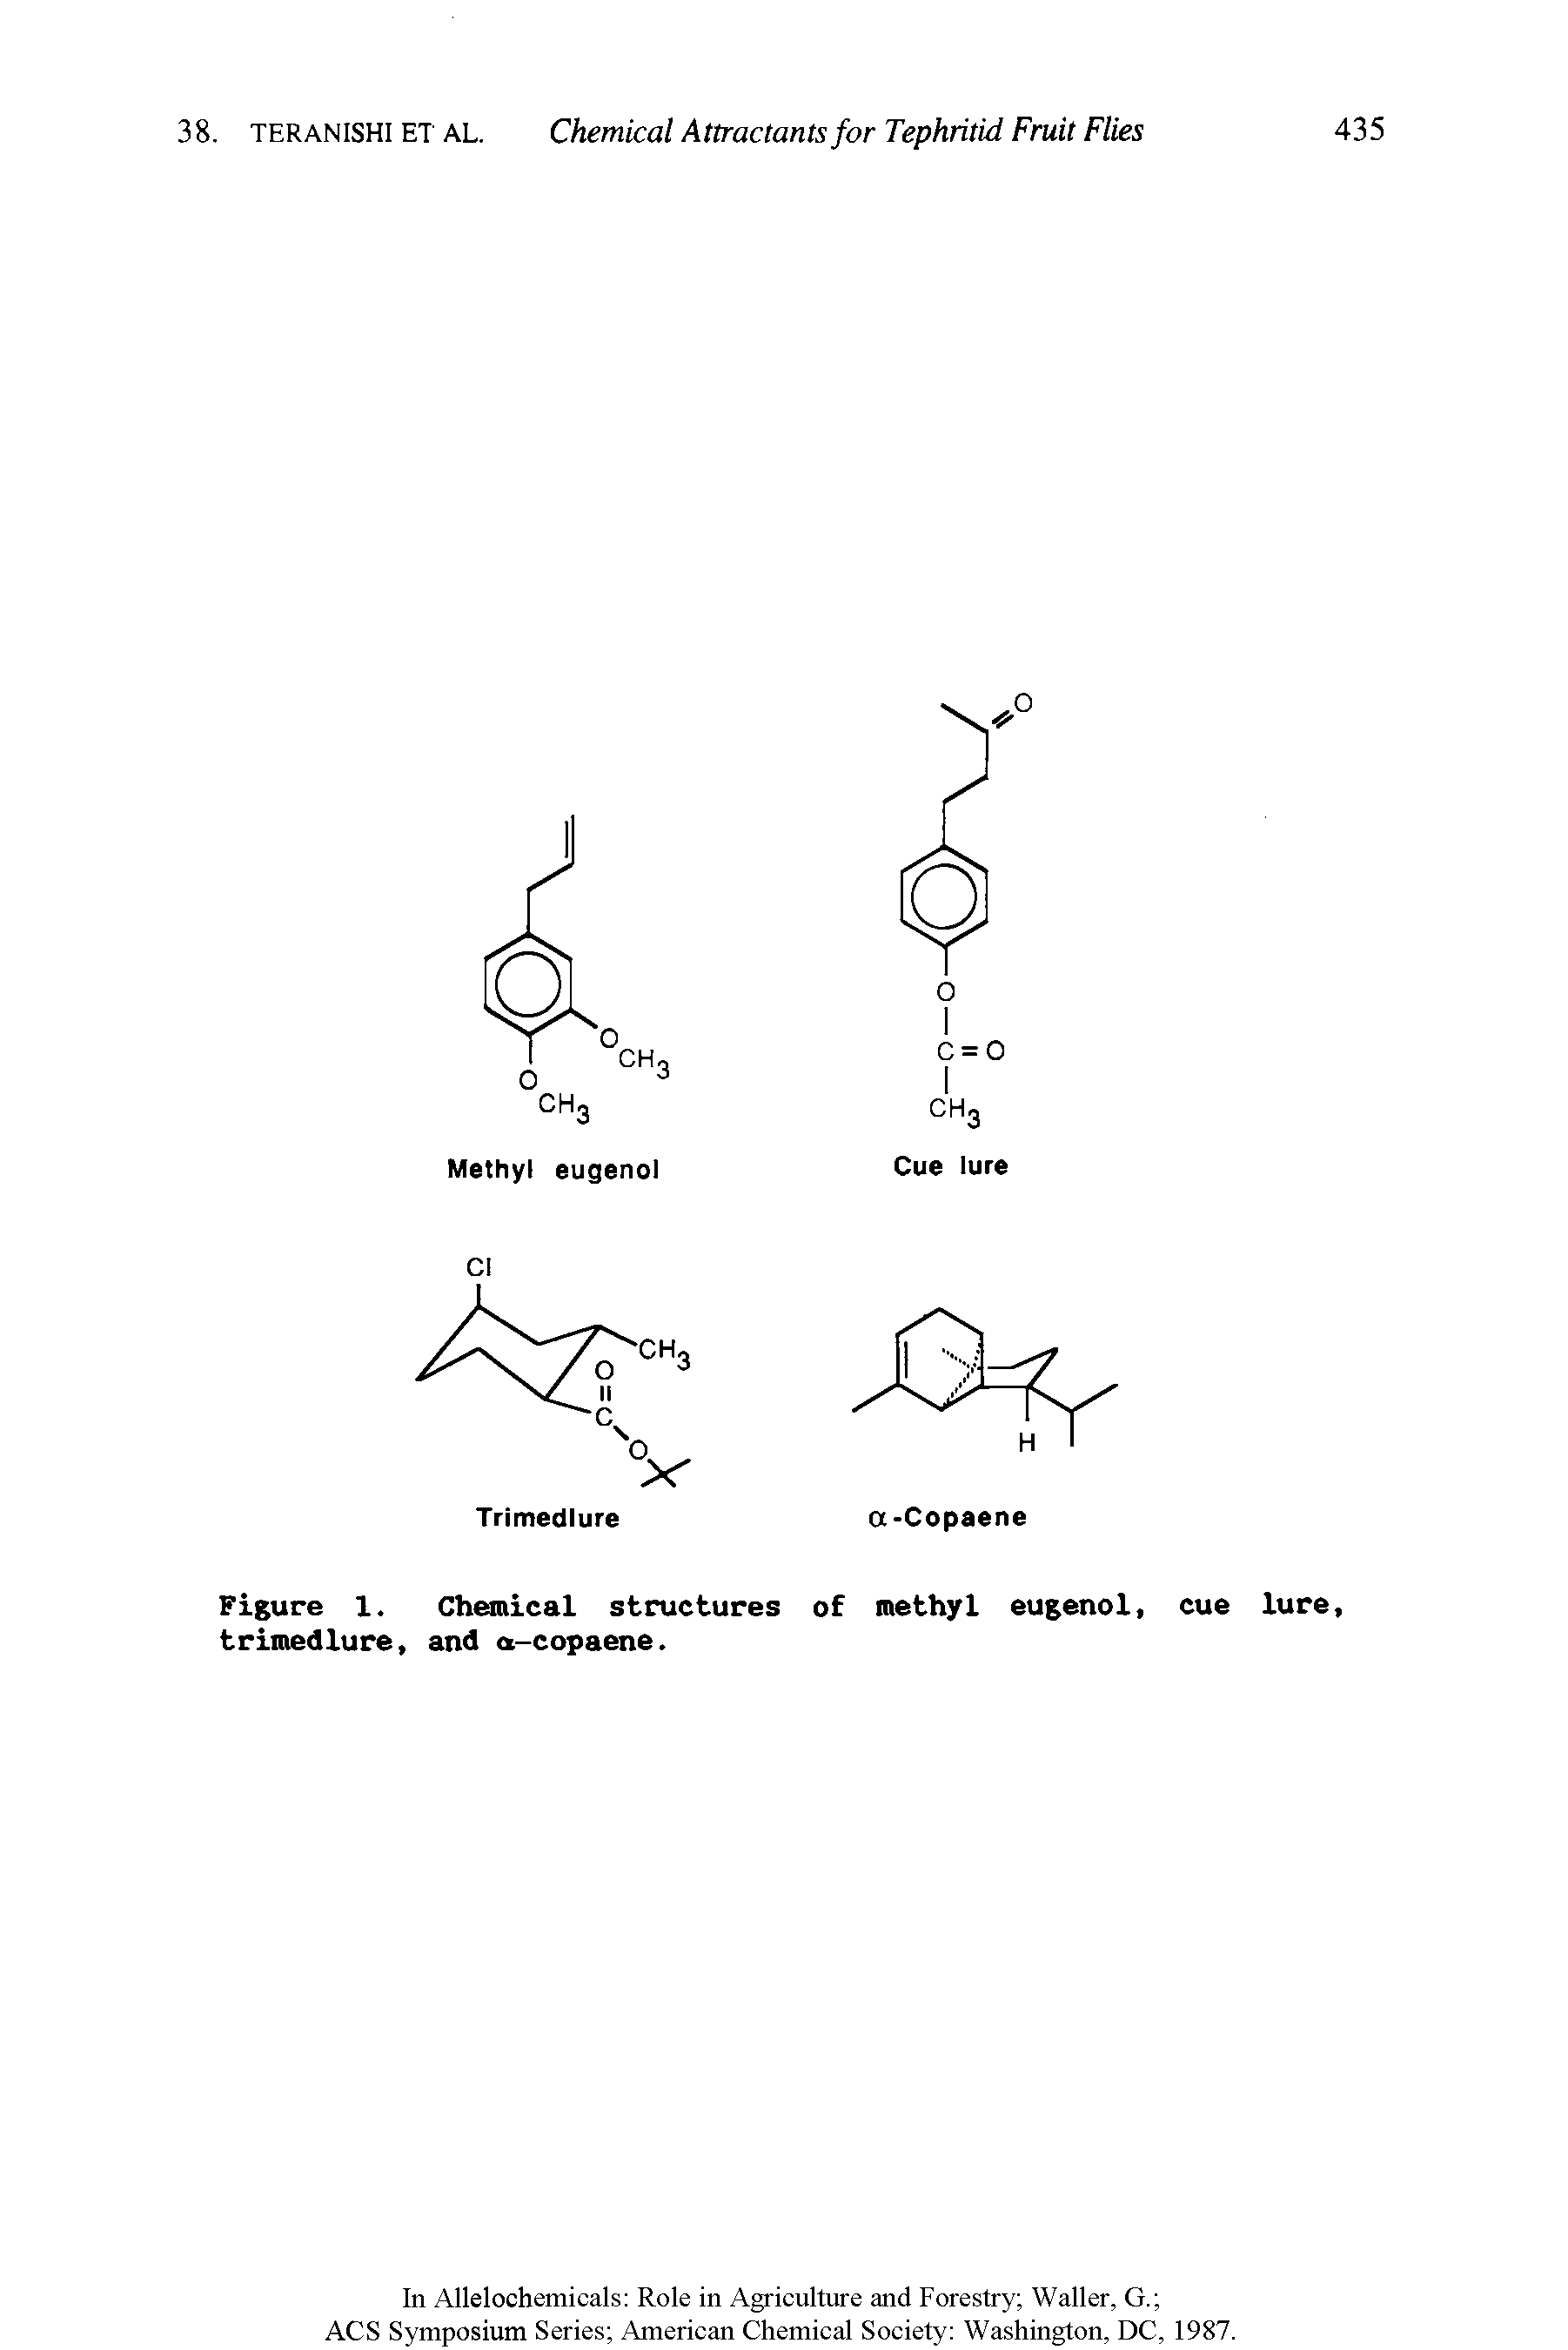 Figure 1. Chemical structures of methyl eugenol, cue lure, trimedlure, and a-copaene.